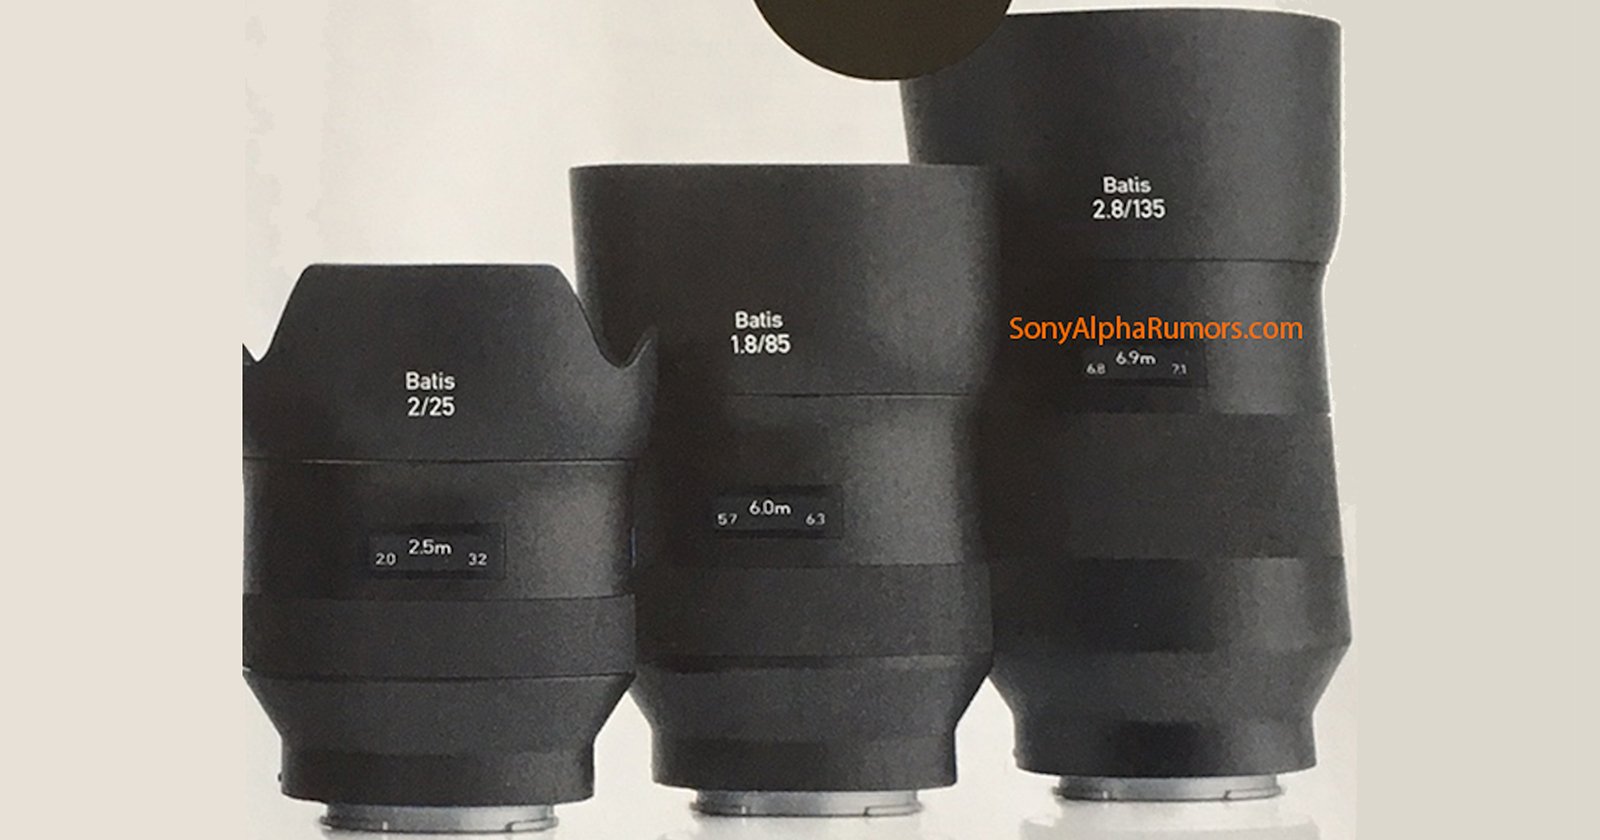 Leaked Photo and Specs for New Zeiss Batis 135mm f/2.8 Lens